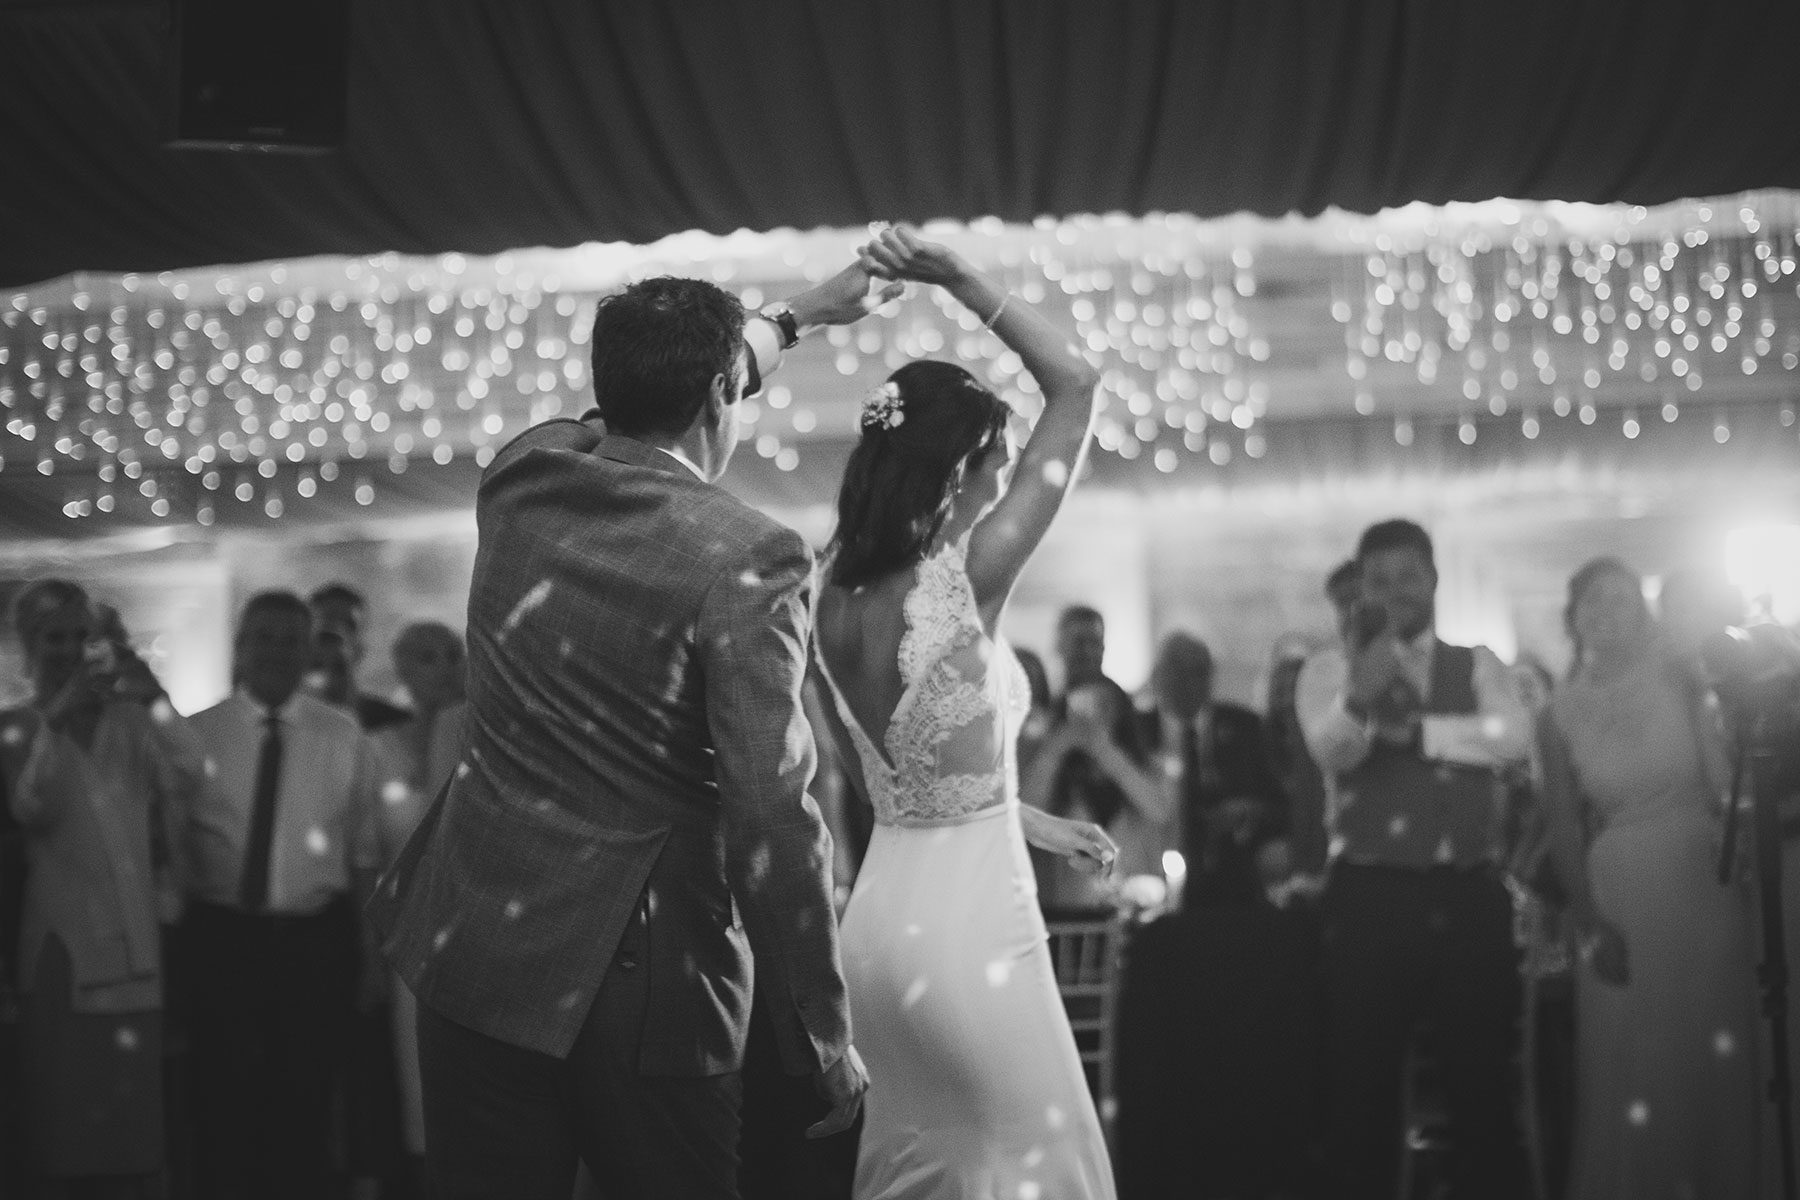 First dance - Reportage Wedding Photography in Cheltenham | Bullit Photography